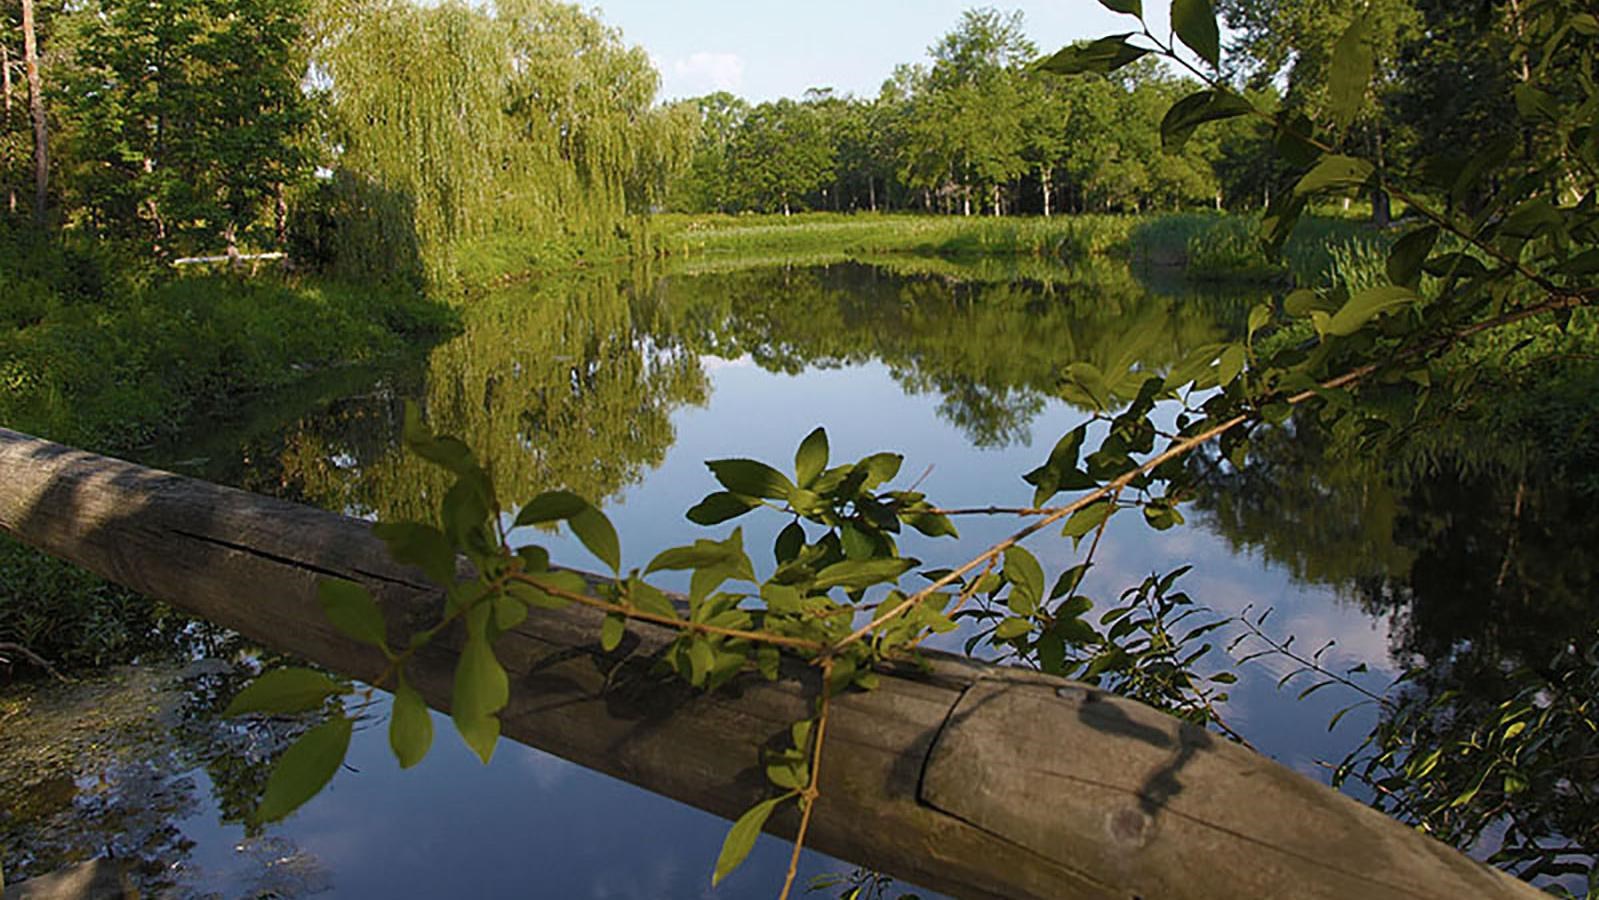 A view of a pond surrounded by lush greenery from the rustic wood railing of a bridge.